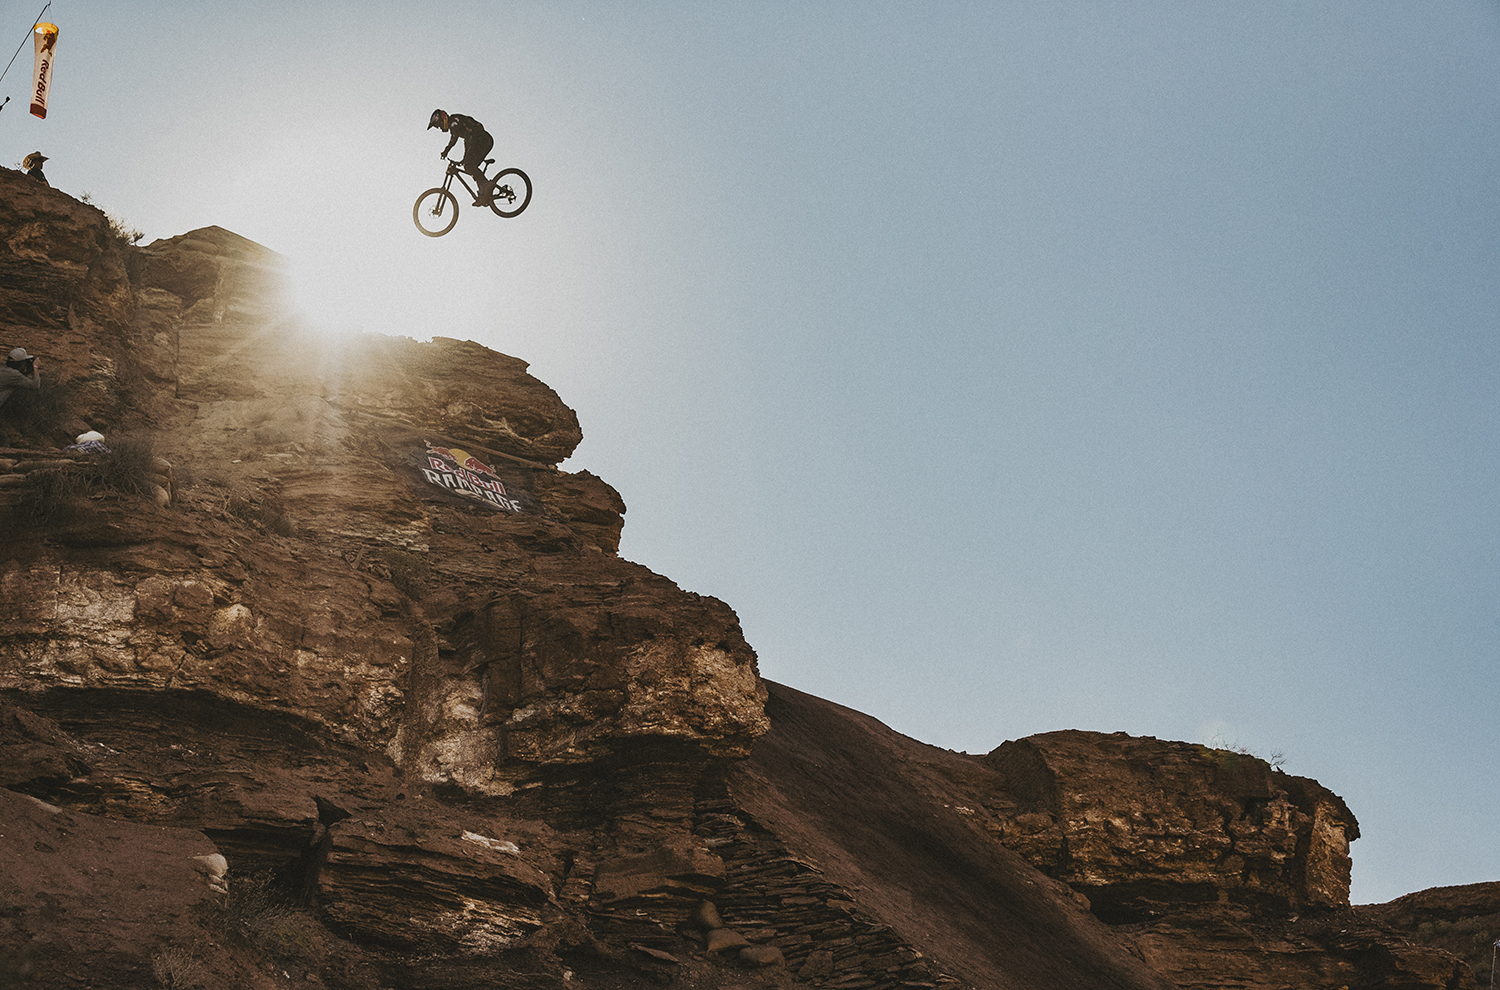 Carson Storch goes on Blister's Bikes & Big Ideas podcast to discuss how he got into mountain biking, the bike scene in Bend, Oregon, competing in Red Bull Rampage and Crankworx, his Quarterpoint film, and more